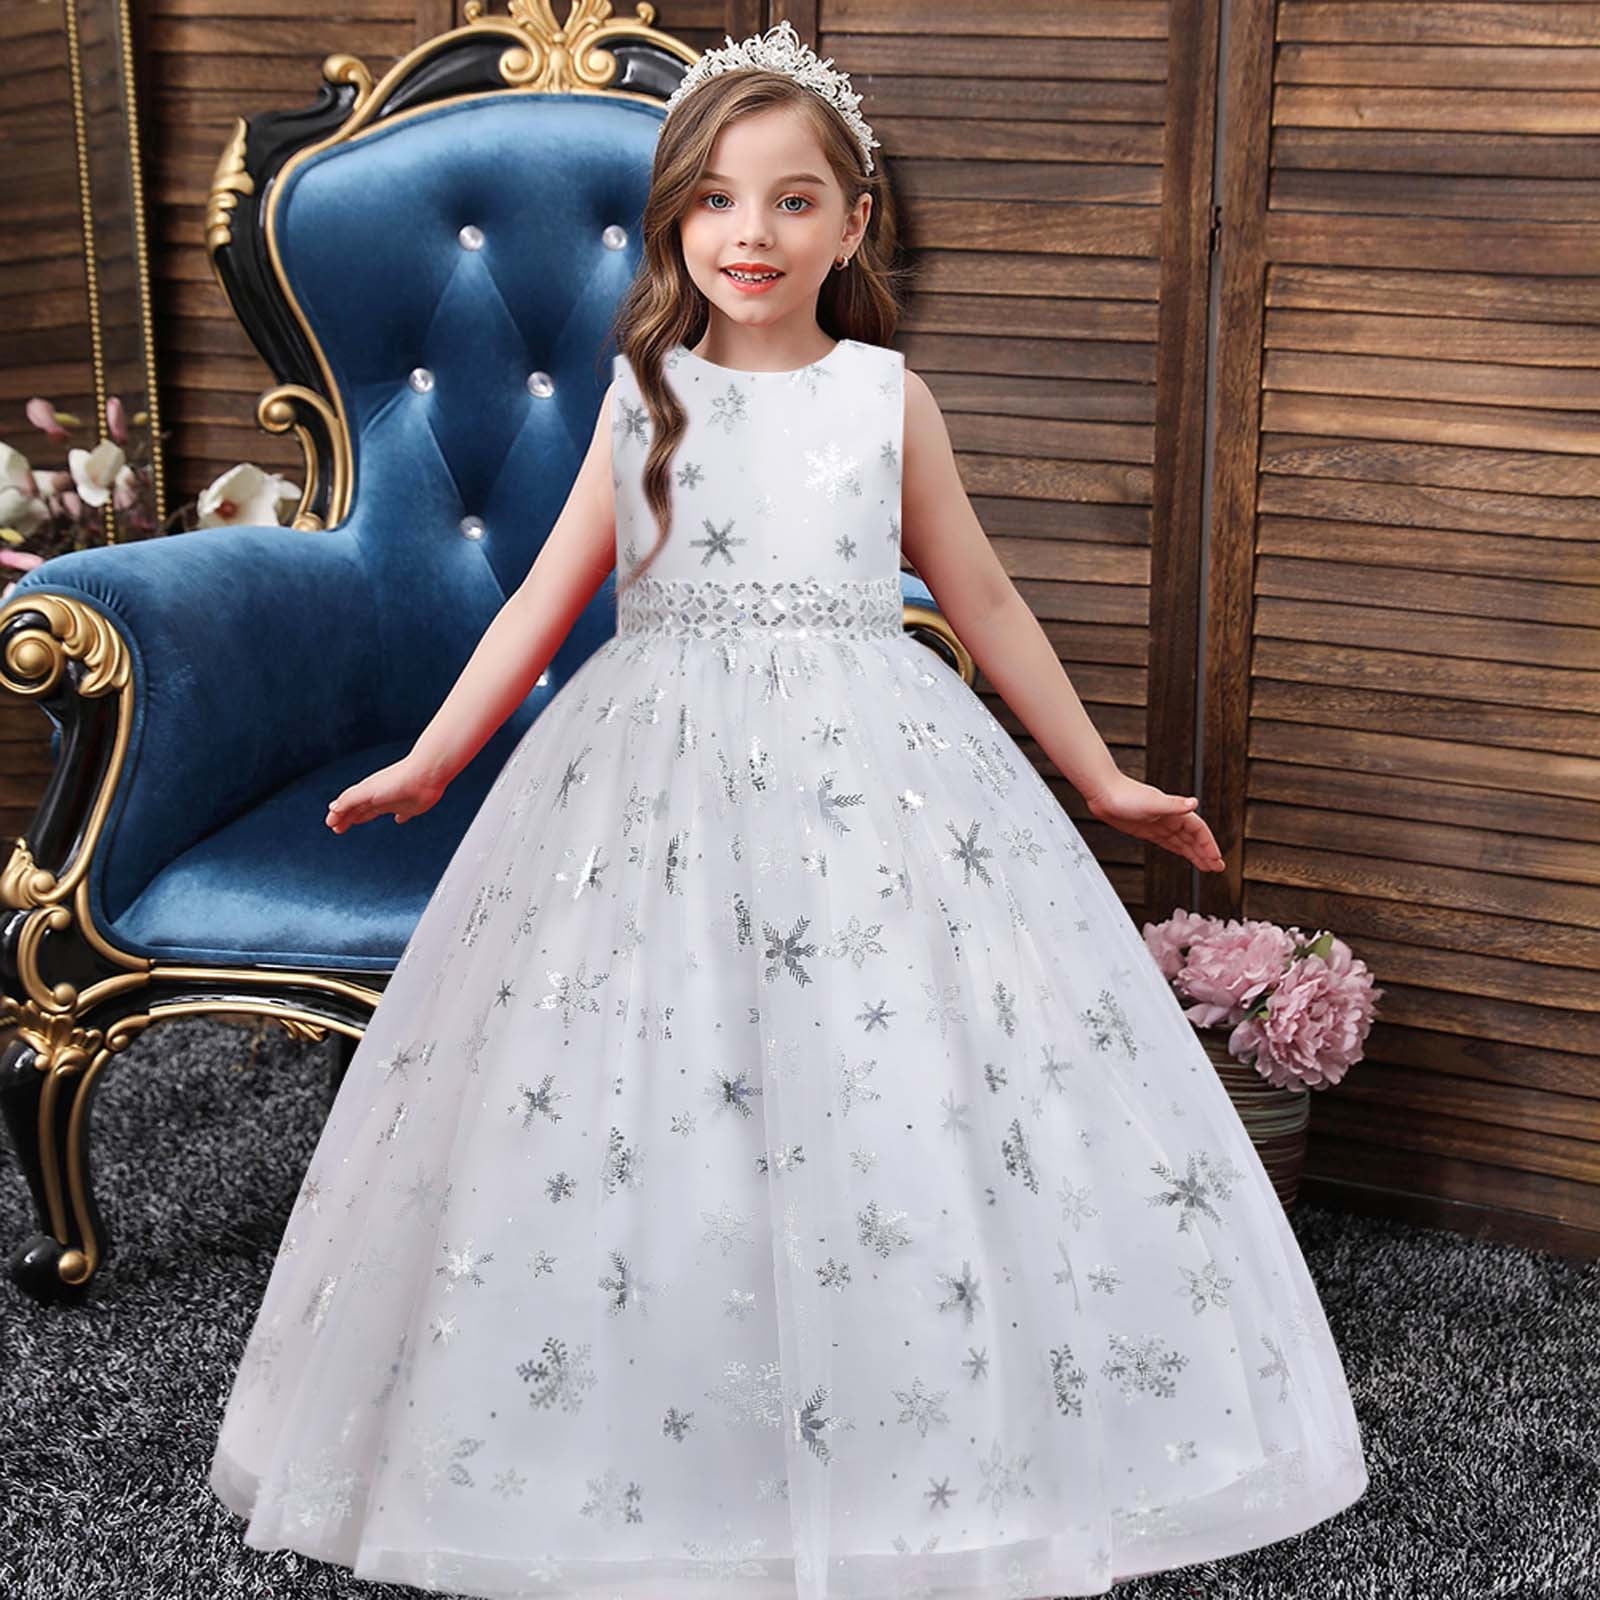 Darleen Kids Couture Flora Gown | White, Pearls, Satin, Round, Frill  Sleeves For Girls | Gowns for girls, Kids dress patterns, Frocks for kids